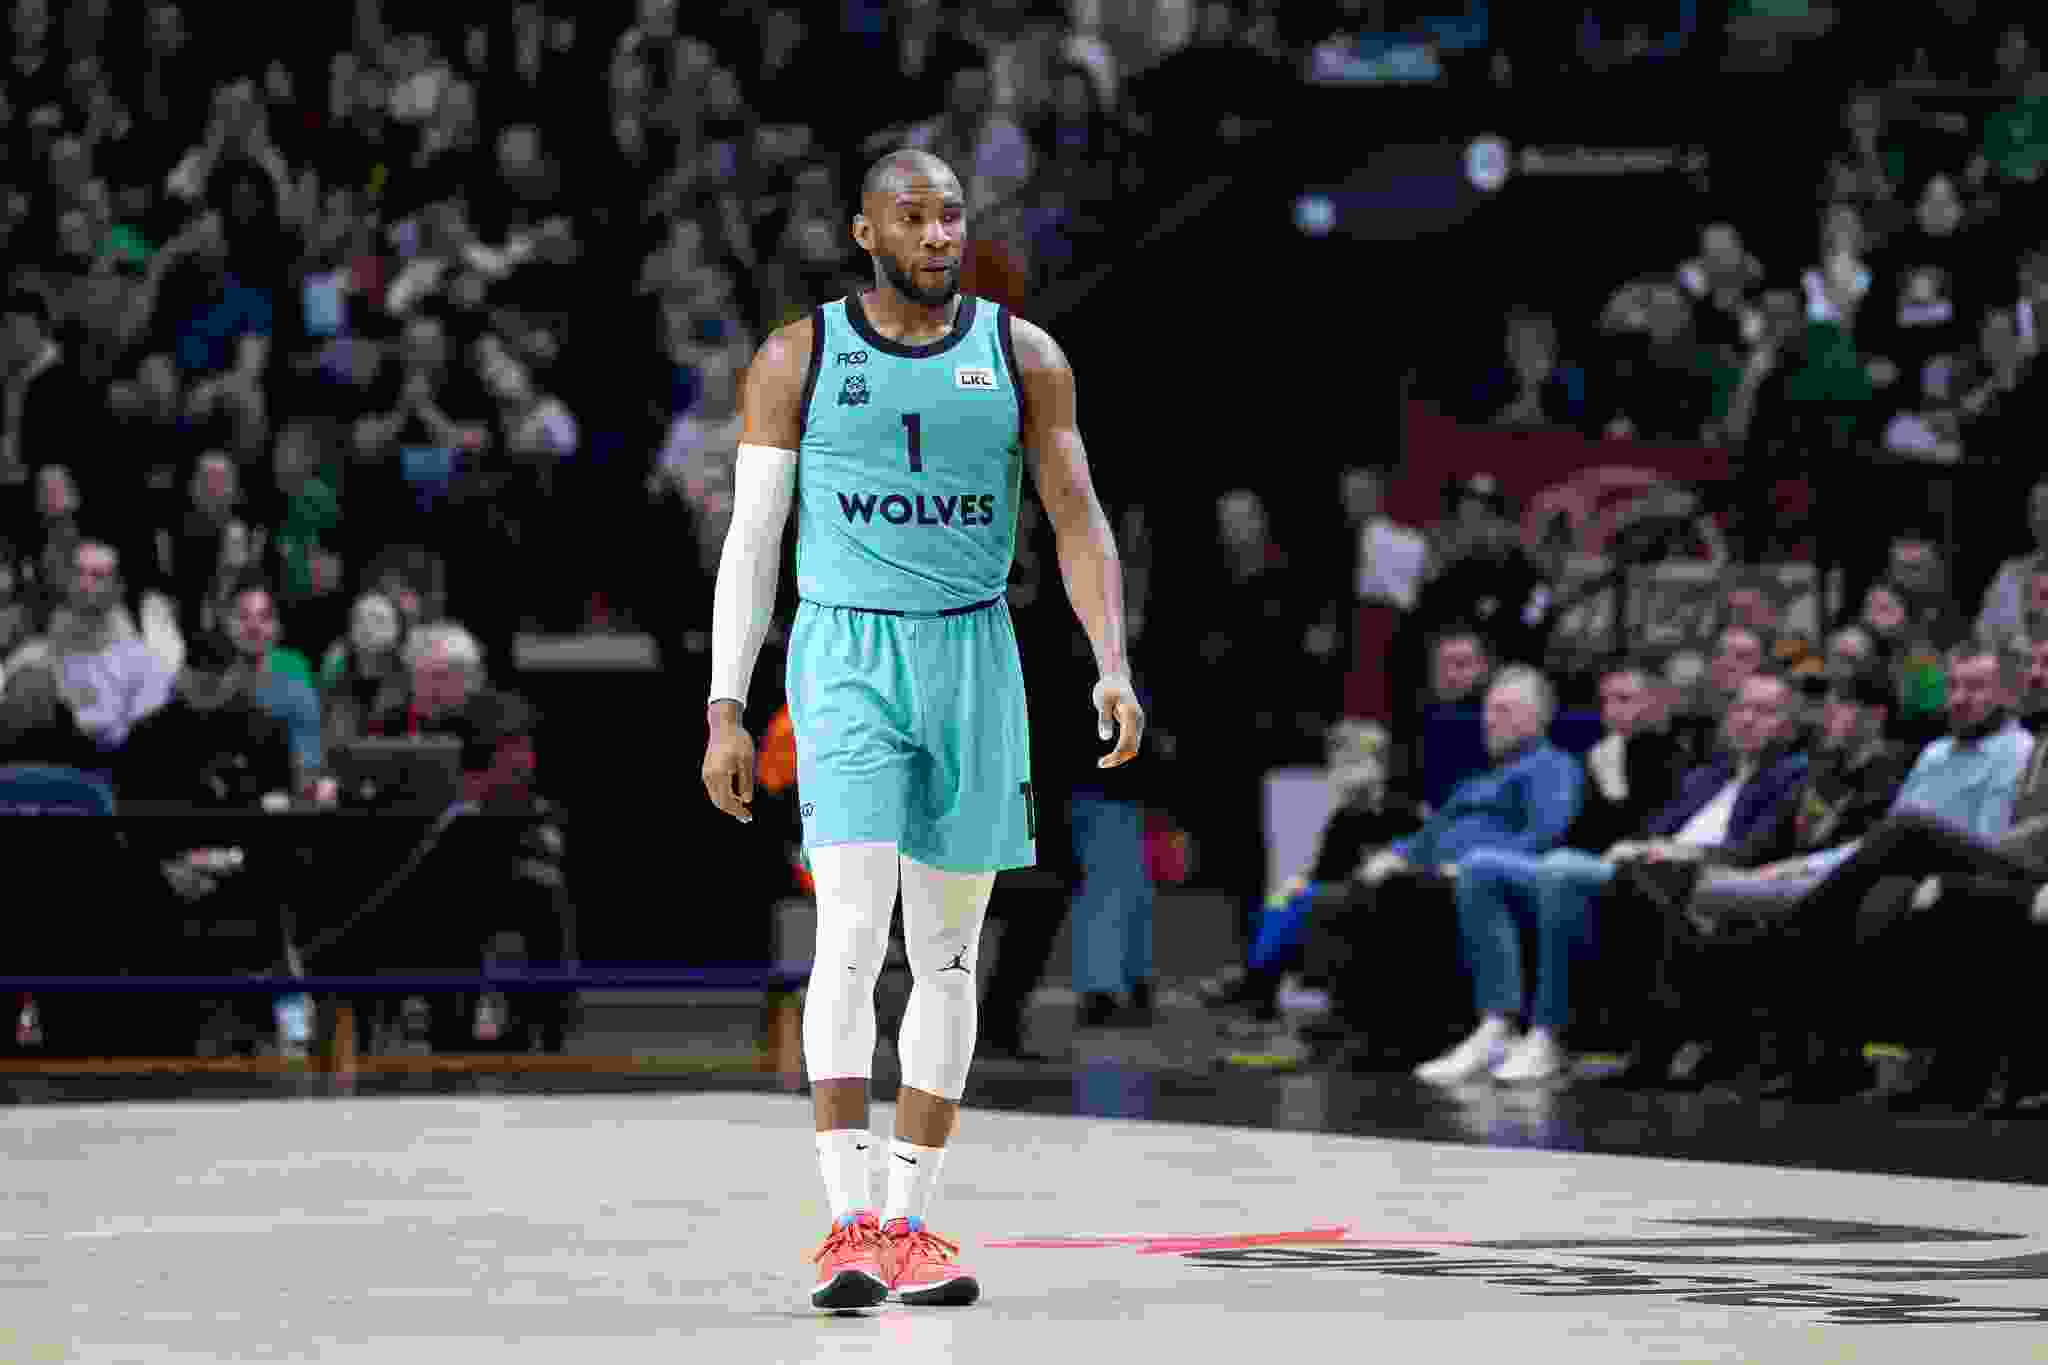 Wolves star guard Rasheed Sulaimon out for four weeks